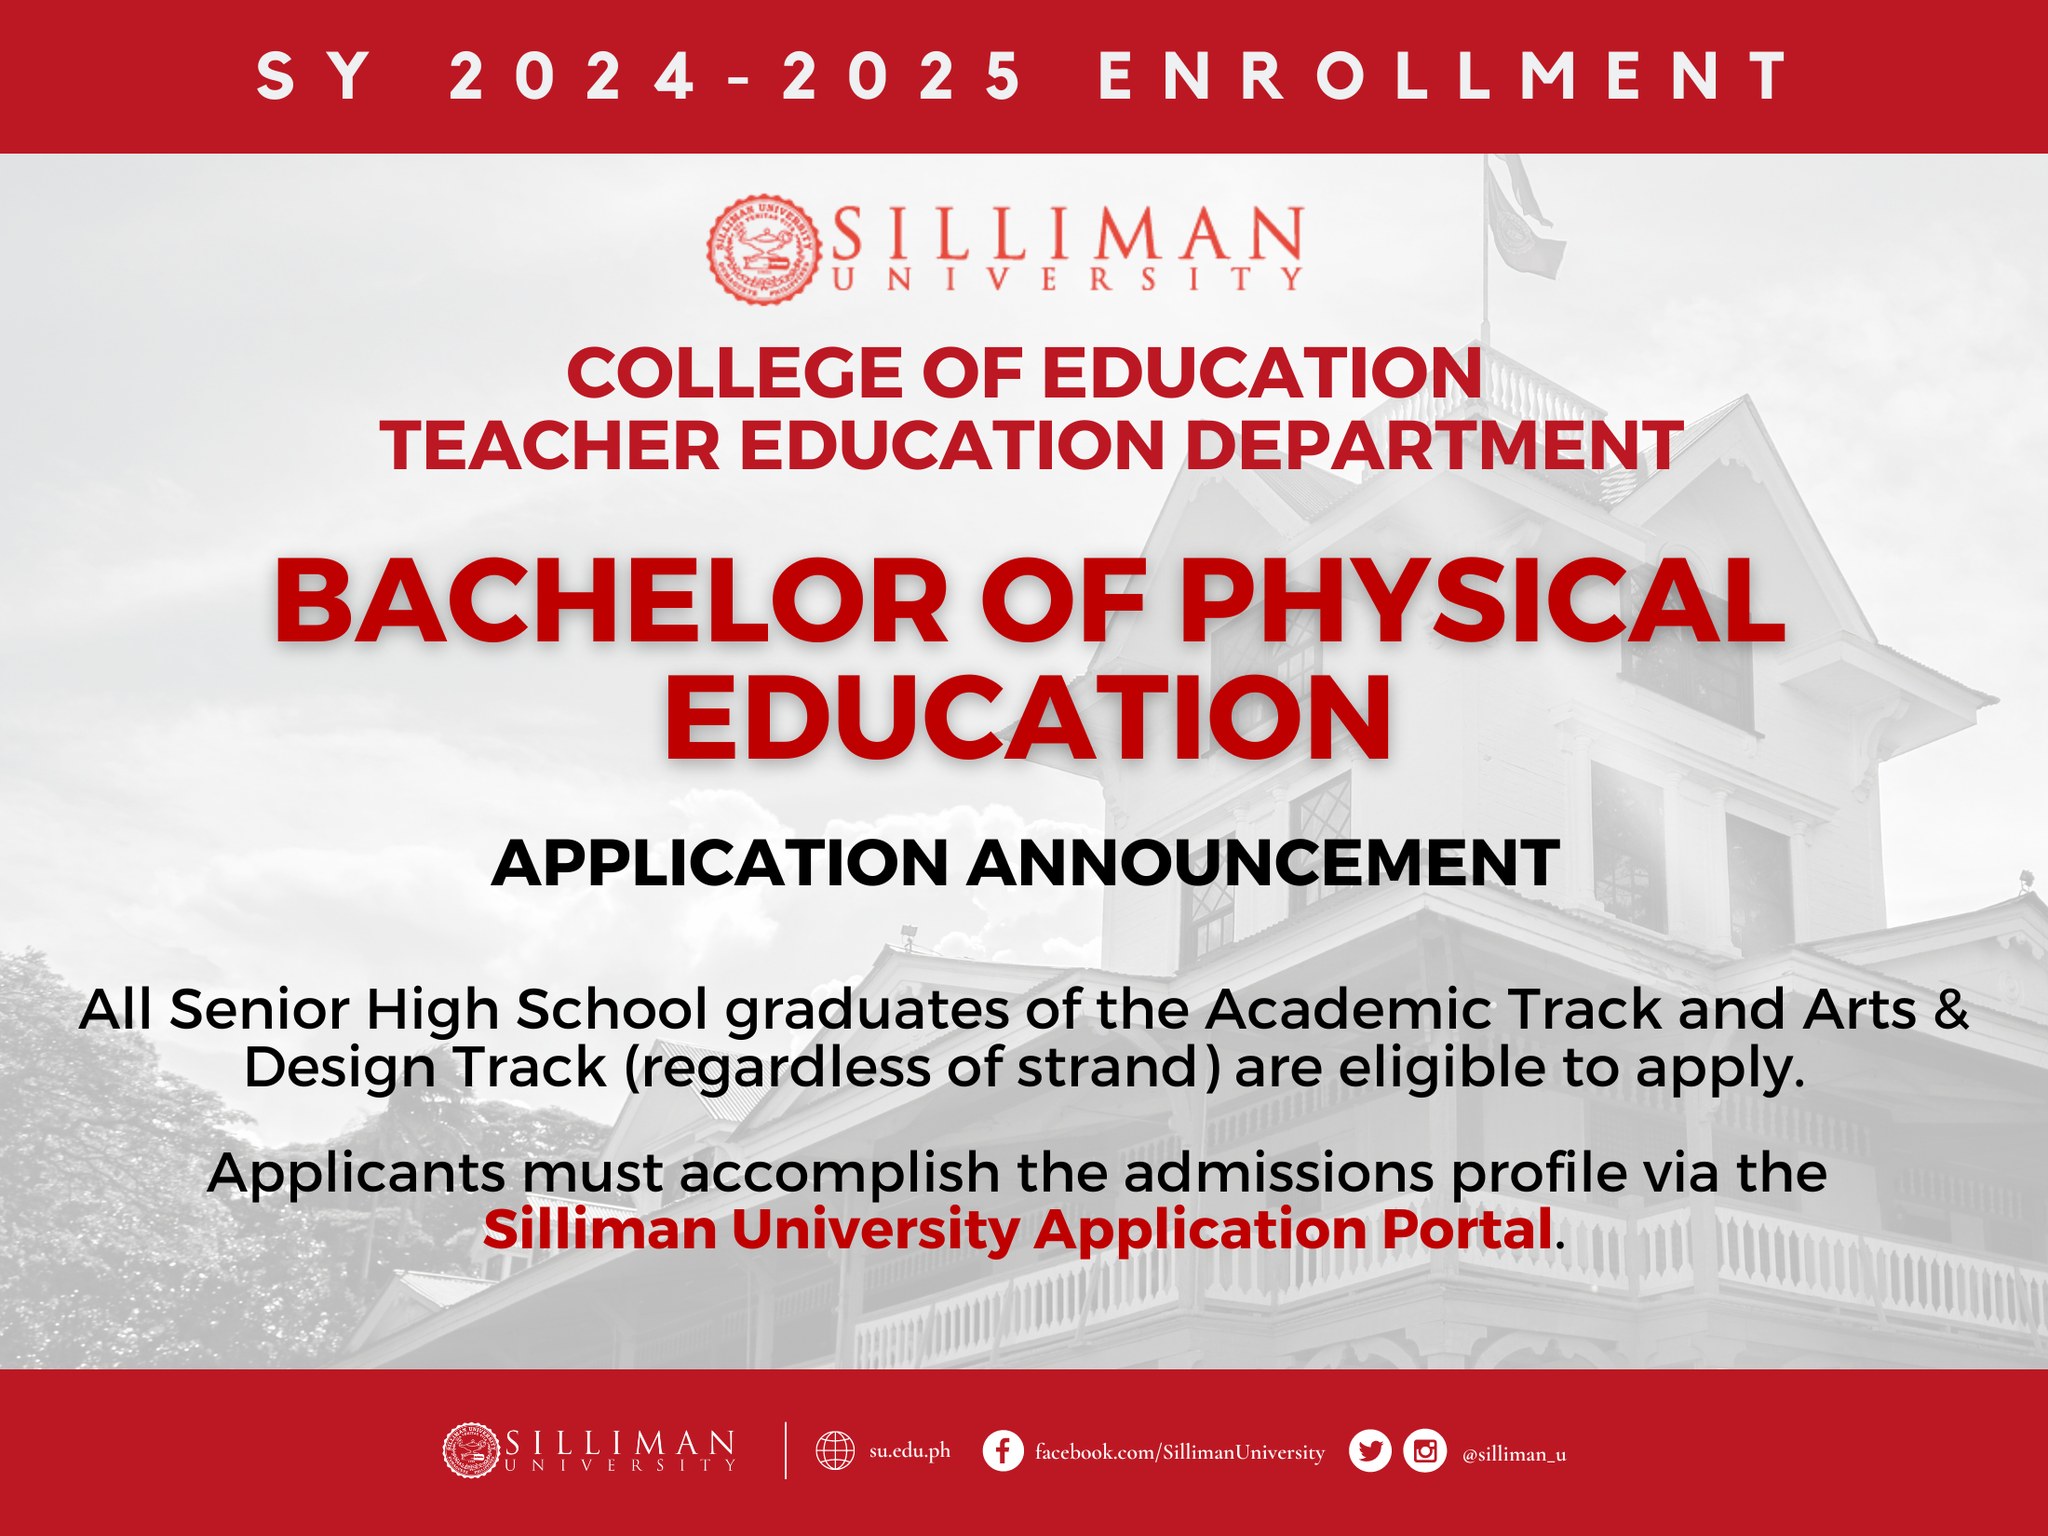 College of Education – Teacher Education Department is now accepting Bachelor of Physical Education for SY 2024-2025